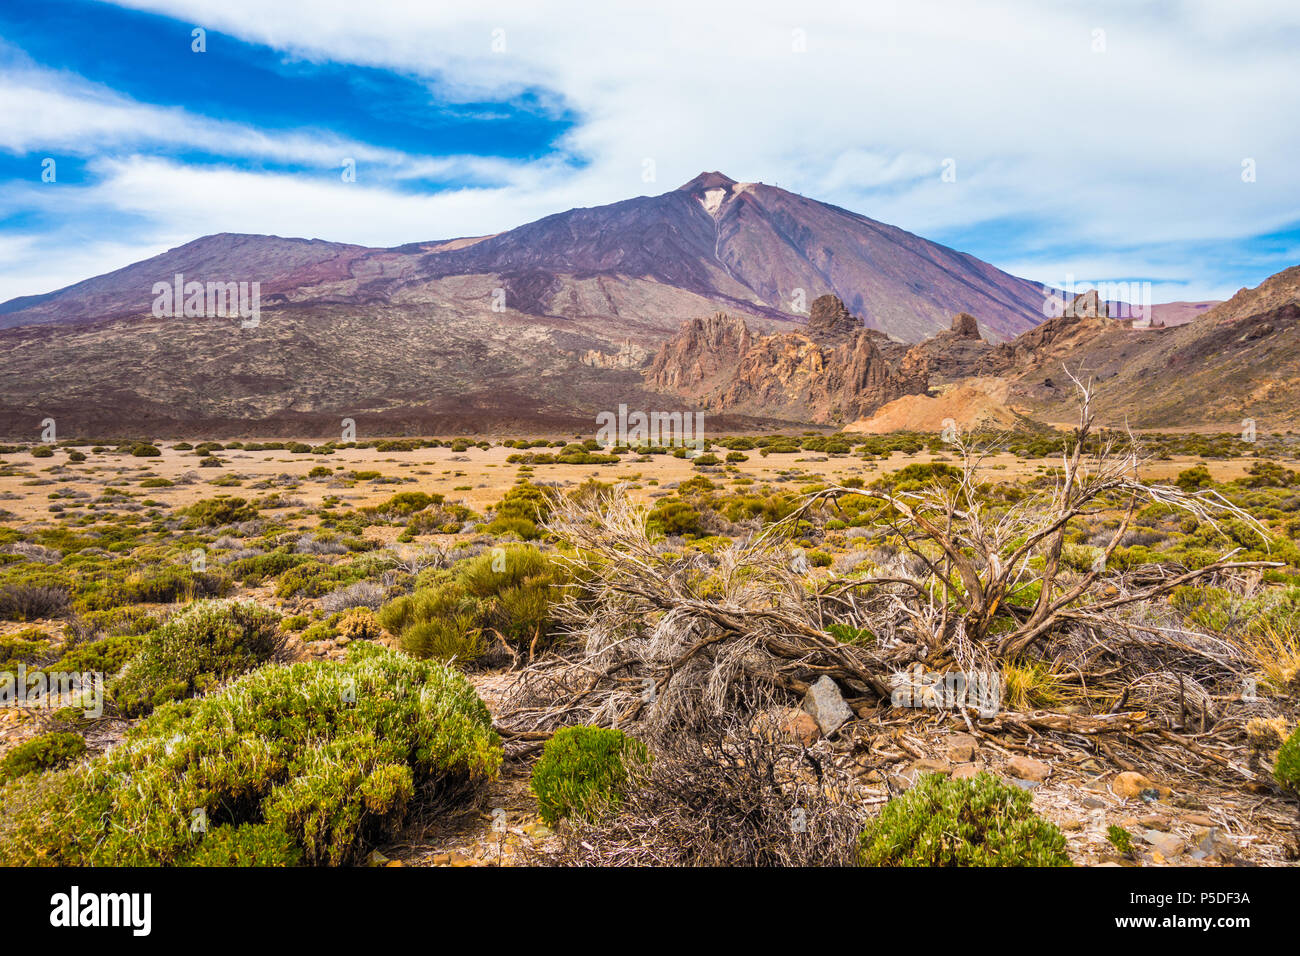 Panoramic view of barren scenery with famous Pico del Teide mountain volcano summit in the background on a beautiful sunny day with clouds, Teide Nati Stock Photo